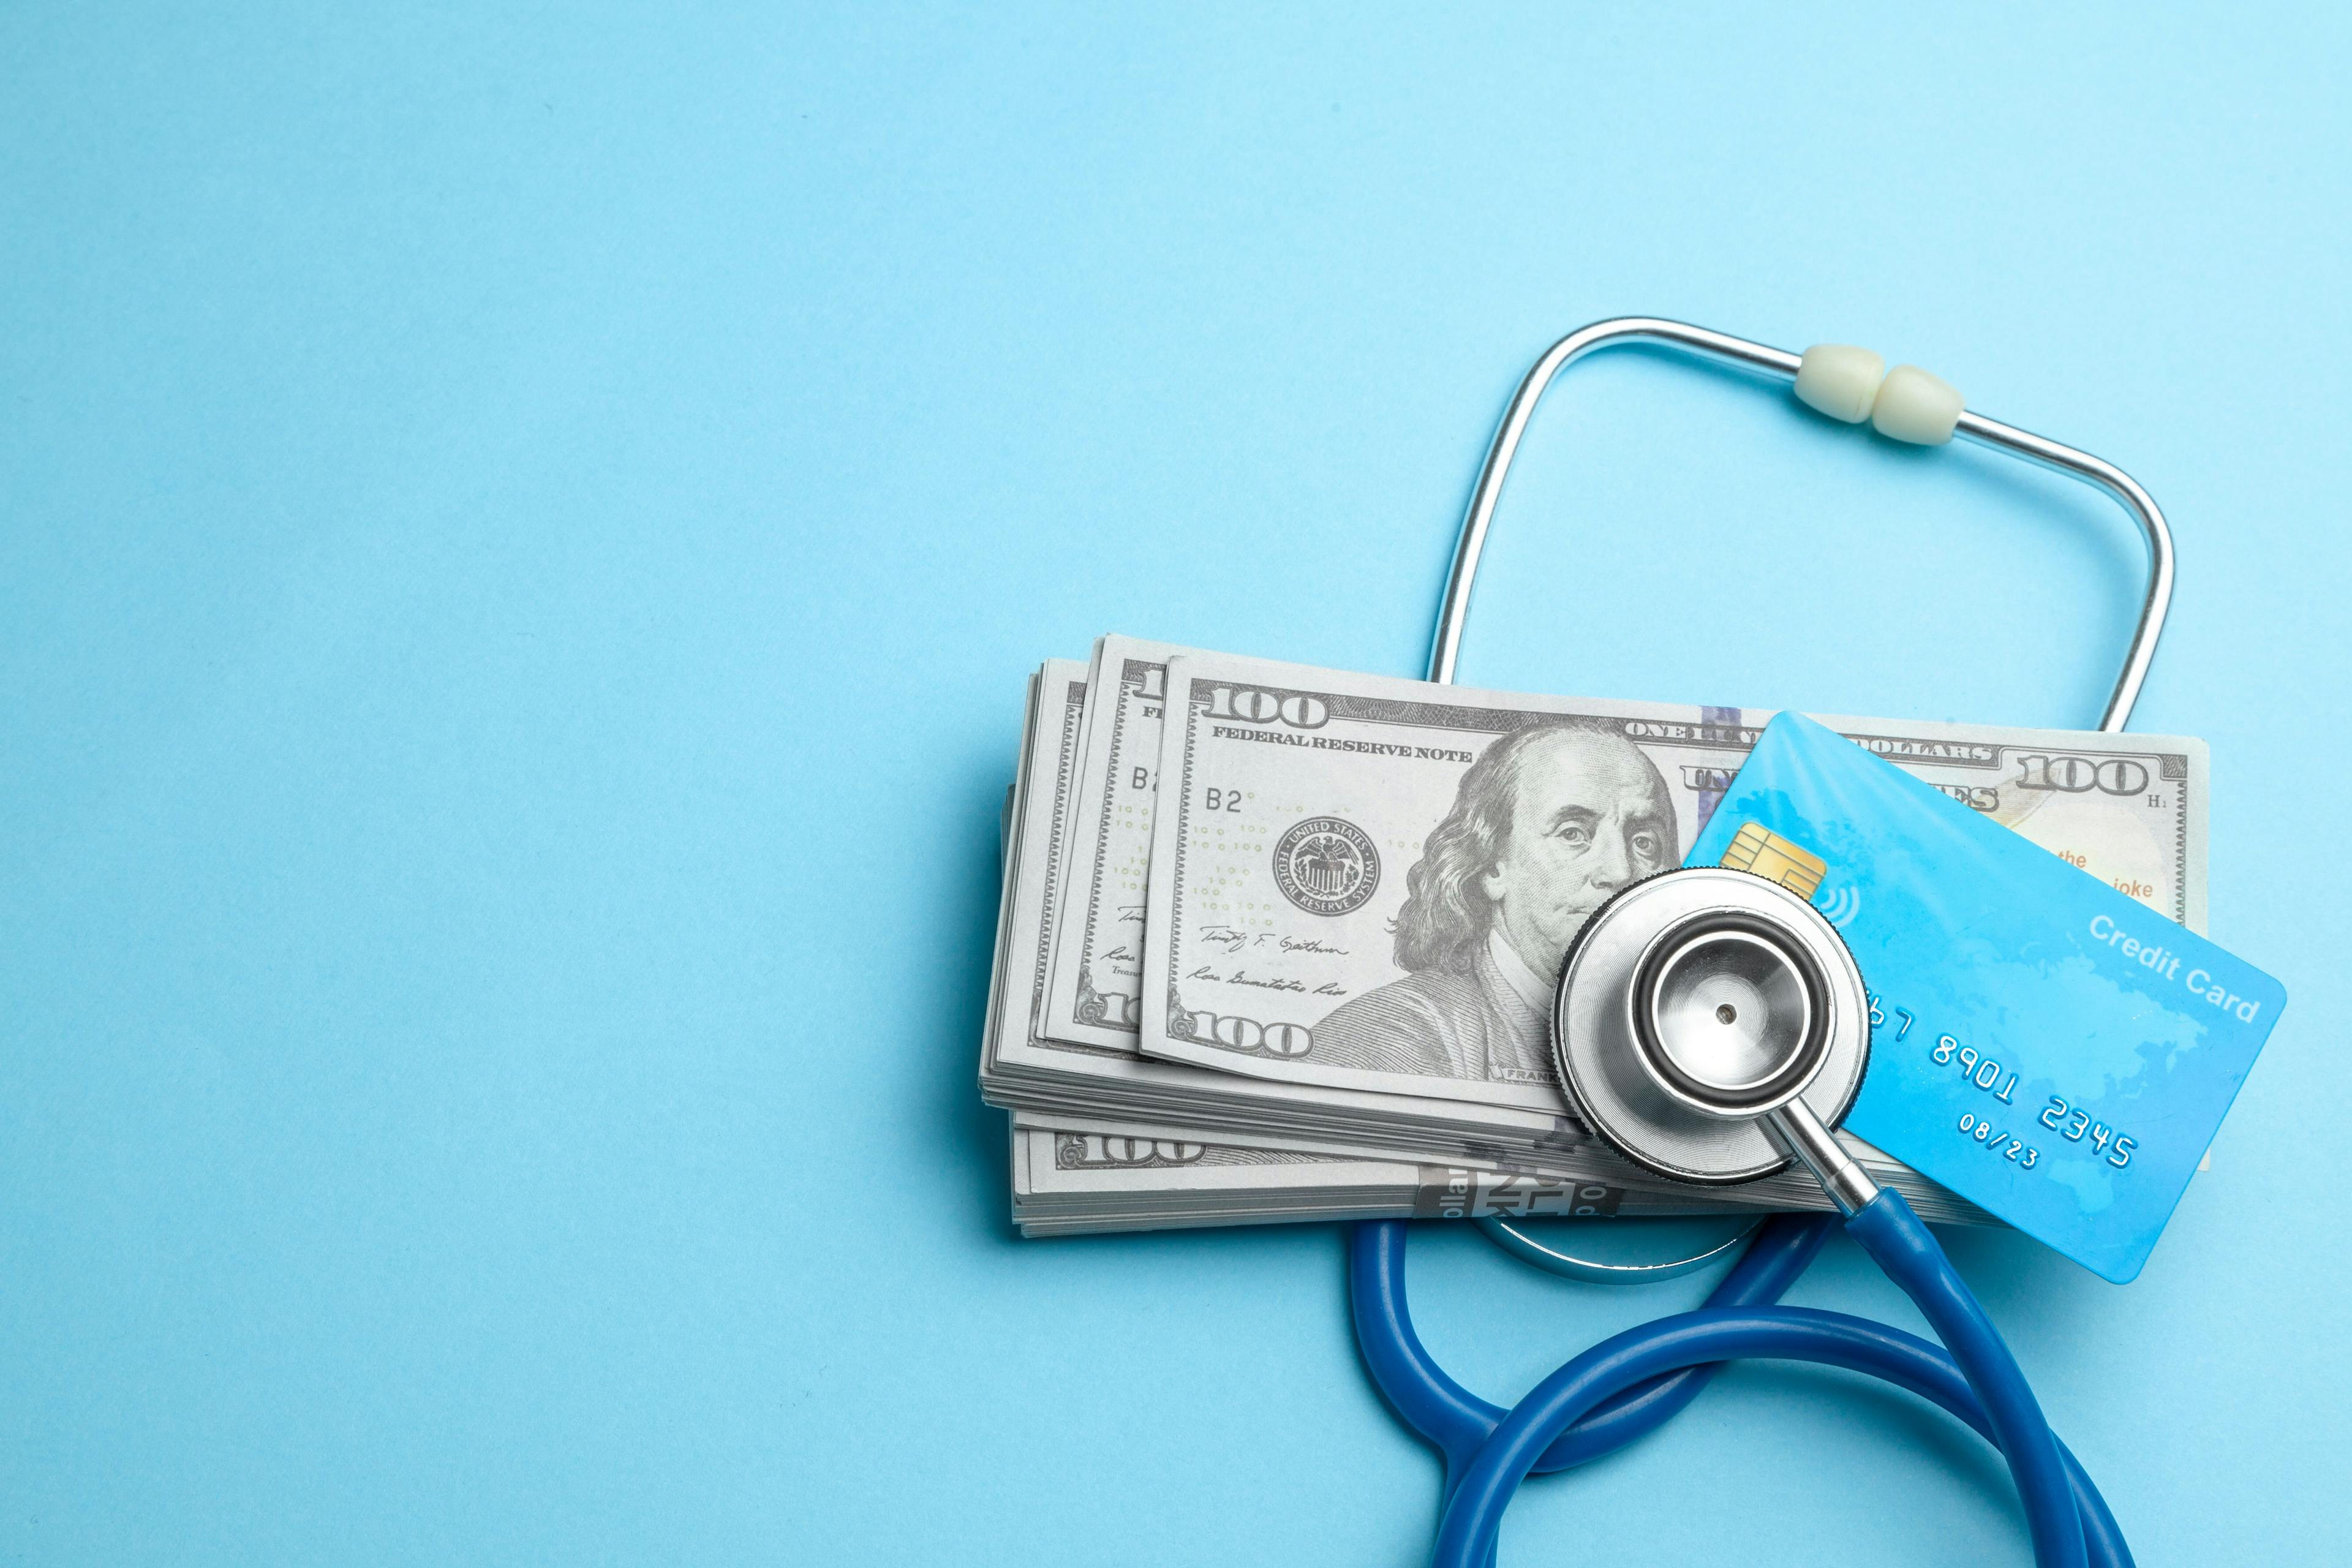 Stethoscope with cash and credit | Image Credit: © adragan - stock.adobe.com